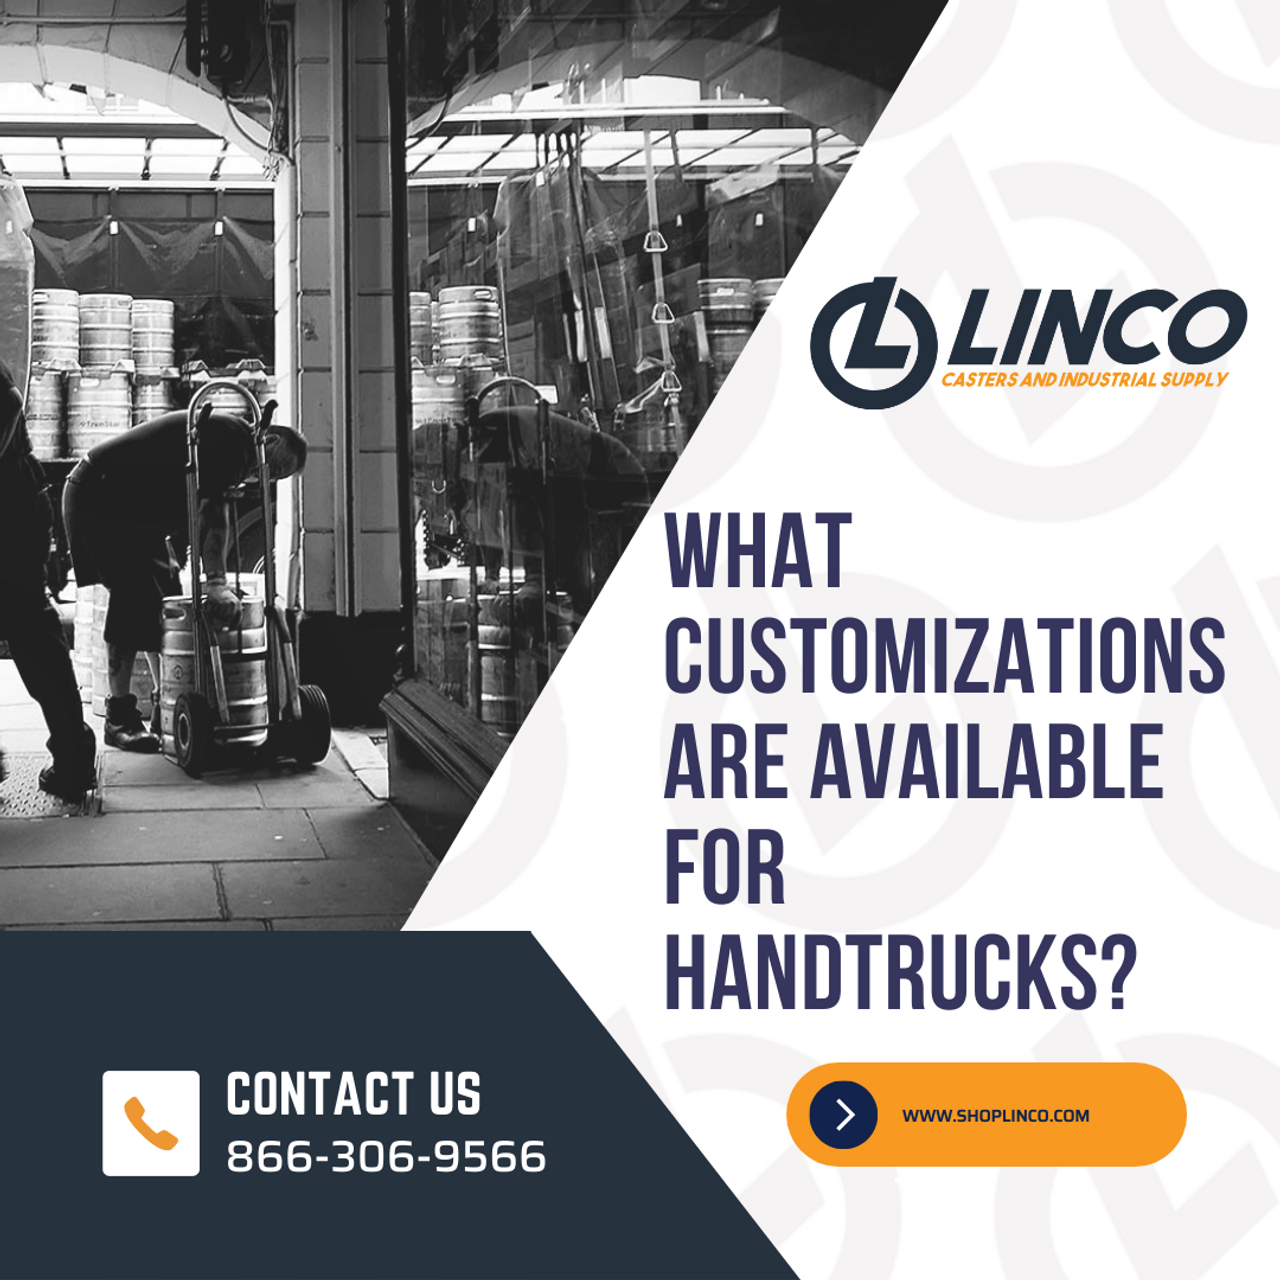 What Customizations Are Available for Handtrucks?